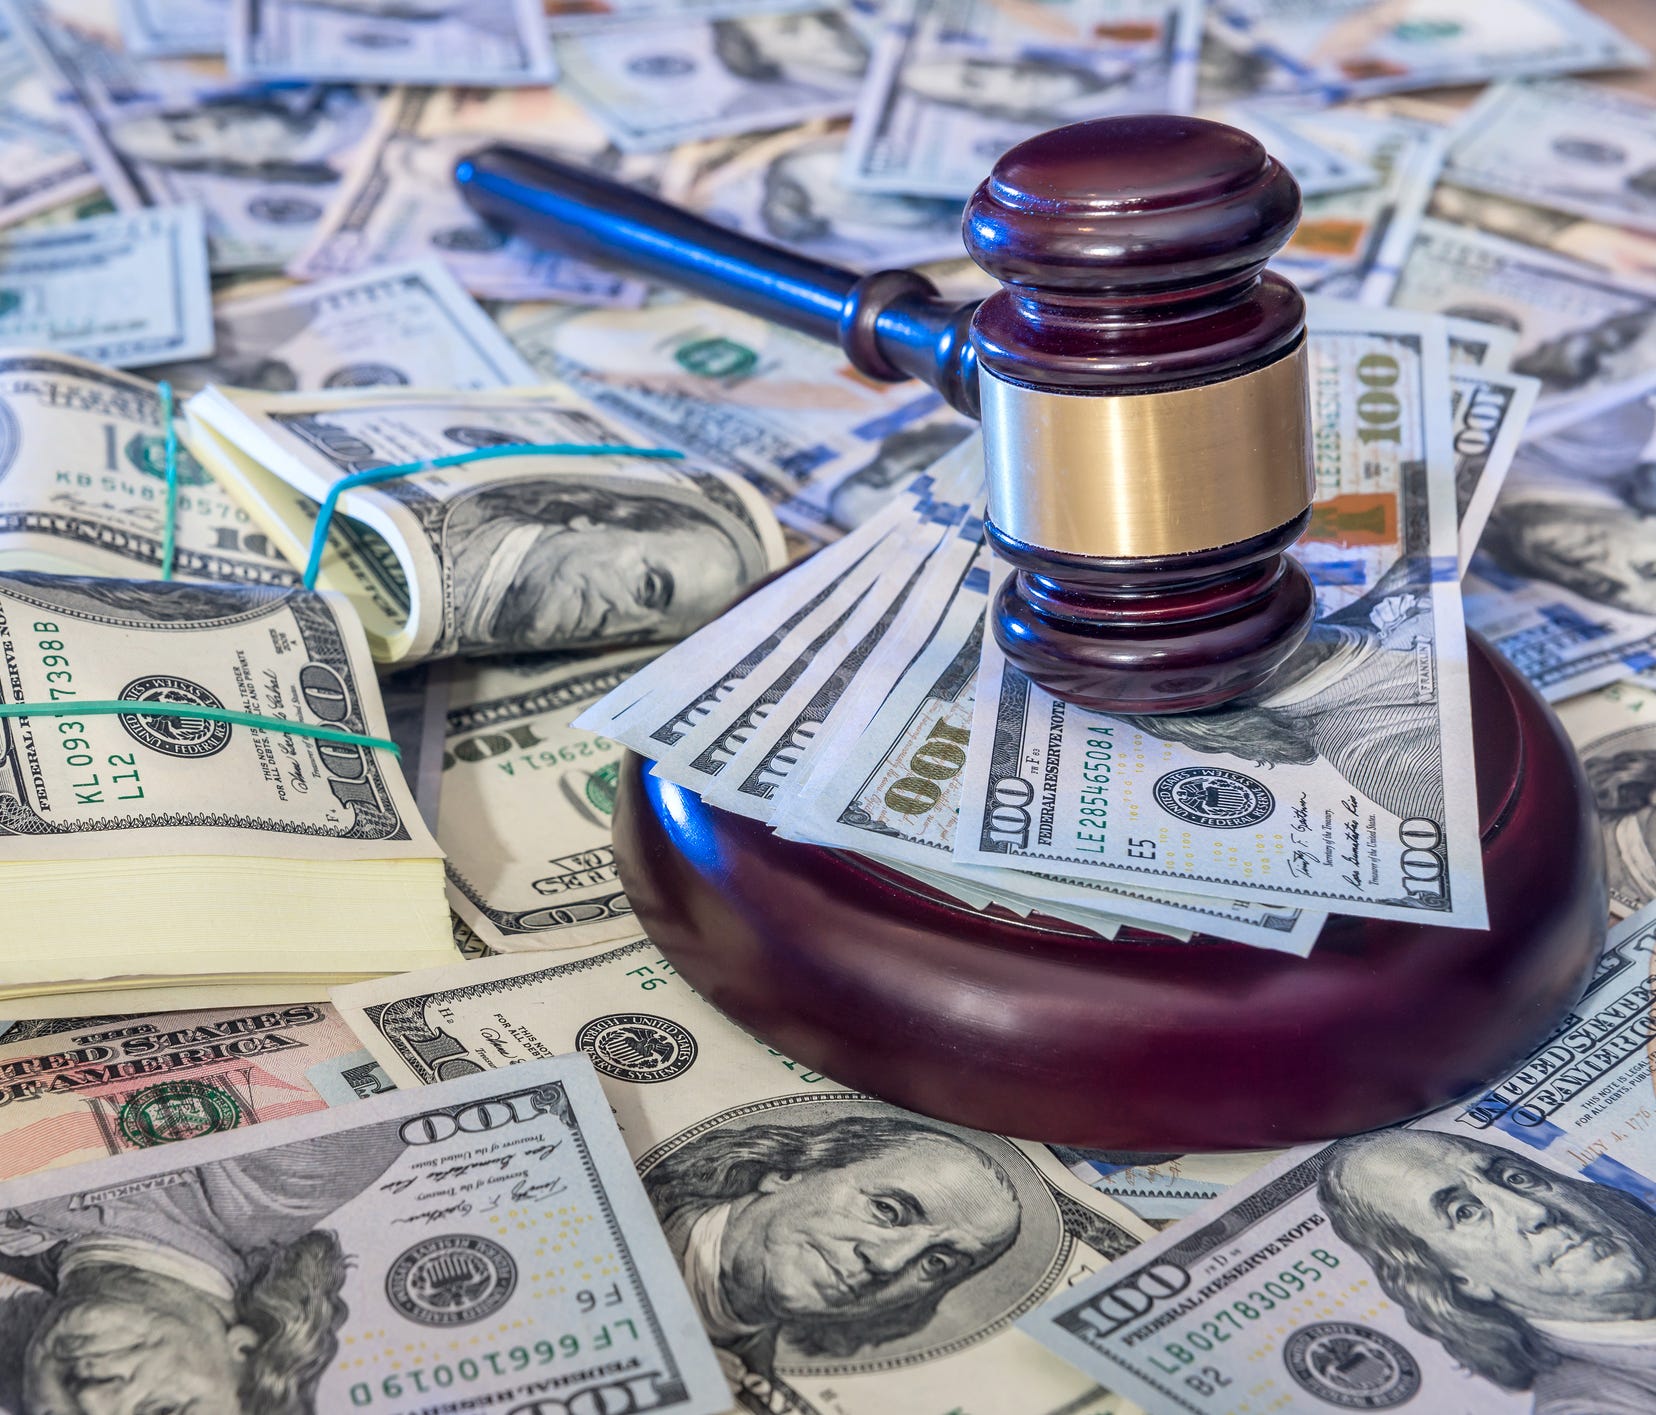 A survey from Chubb found that 10 percent of respondents were forced to cough up at least $100,000 in legal judgments. Only 1 in 10 of those polled had excess liability coverage.